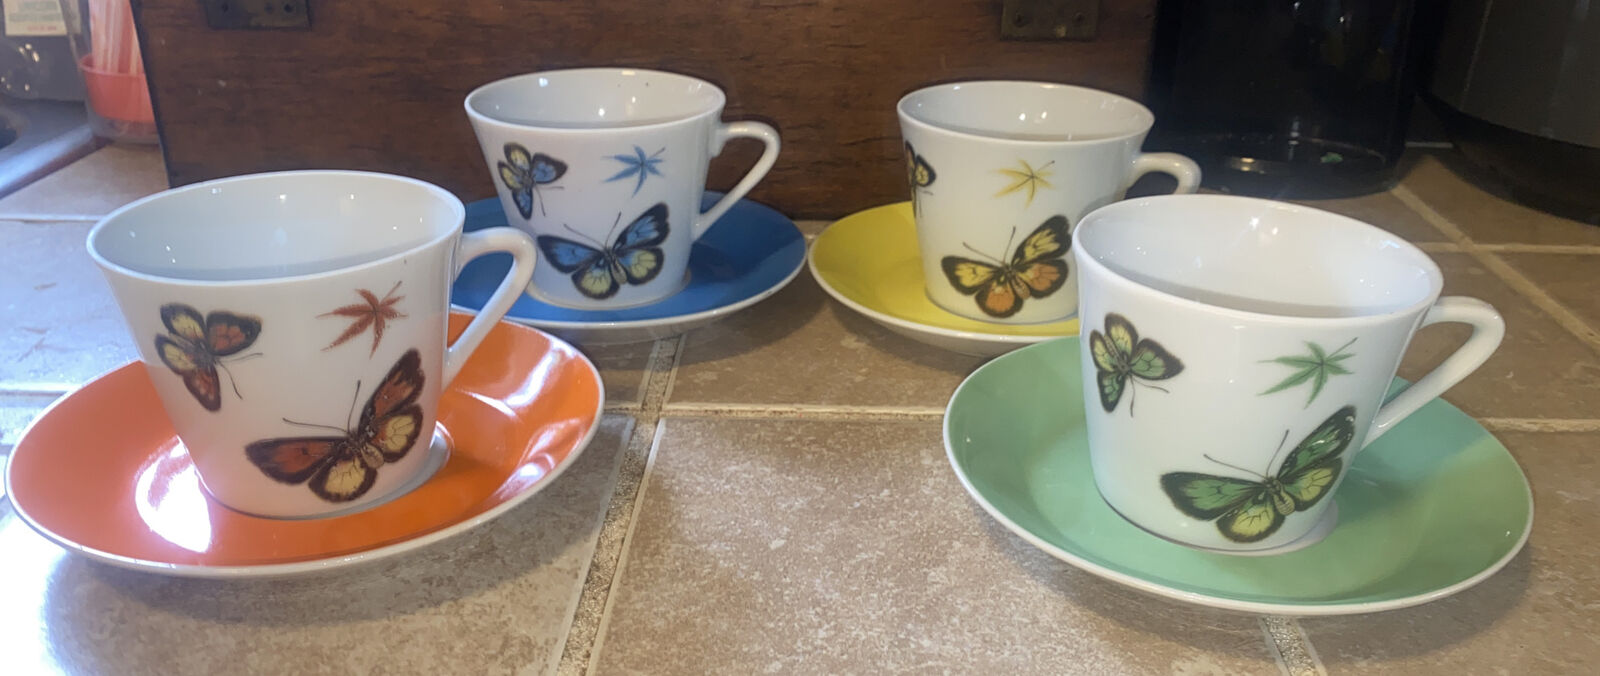 Nasco Japan Butterfly And Leaf Cup And Saucer Set